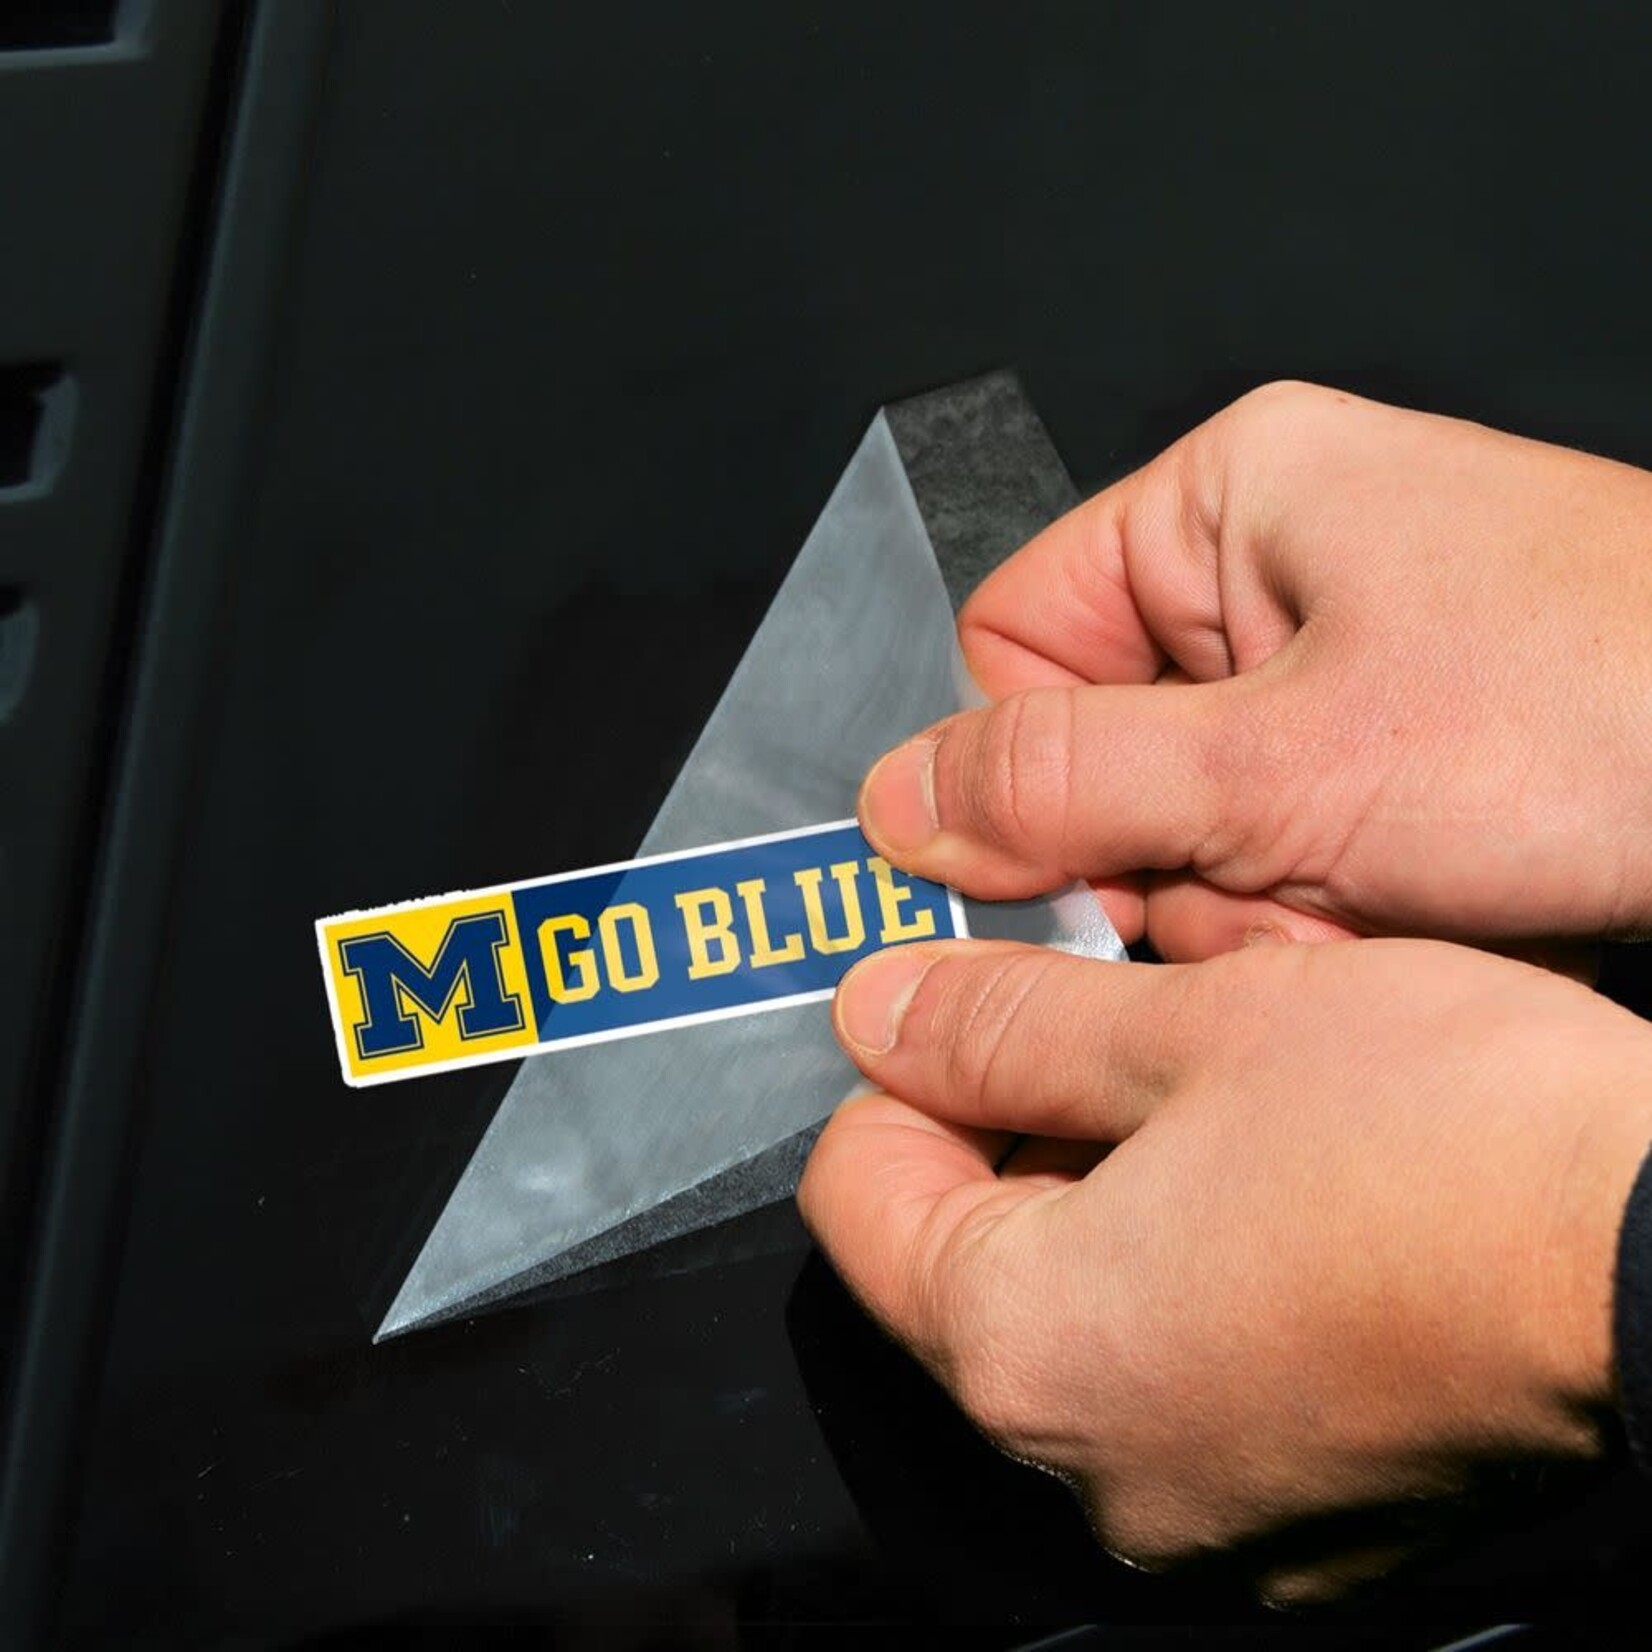 Wincraft NCAA Michigan Wolverines Decal Perfect Cut 4''x4'' Go Blue 2 Pack